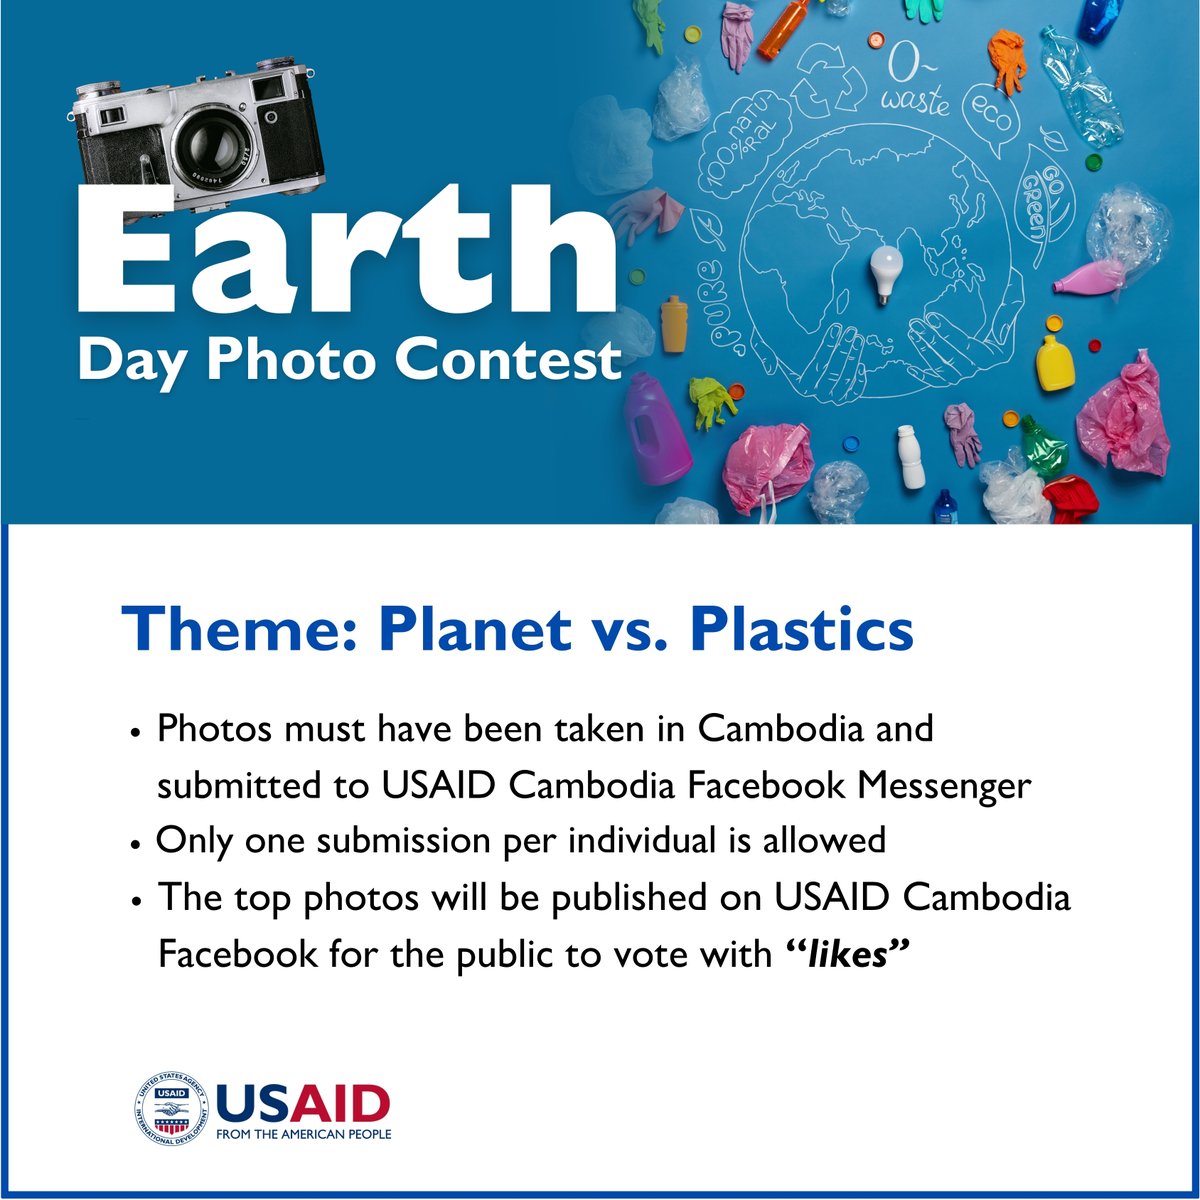 📸 Join the @USAIDCambodia Earth Day Photo Contest 2024! Capture the beauty of our planet & raise awareness of plastic pollution. Submit your photo by April 24 to win a prize! #PlanetvsPlastics #PhotoContest #EarthDay2024